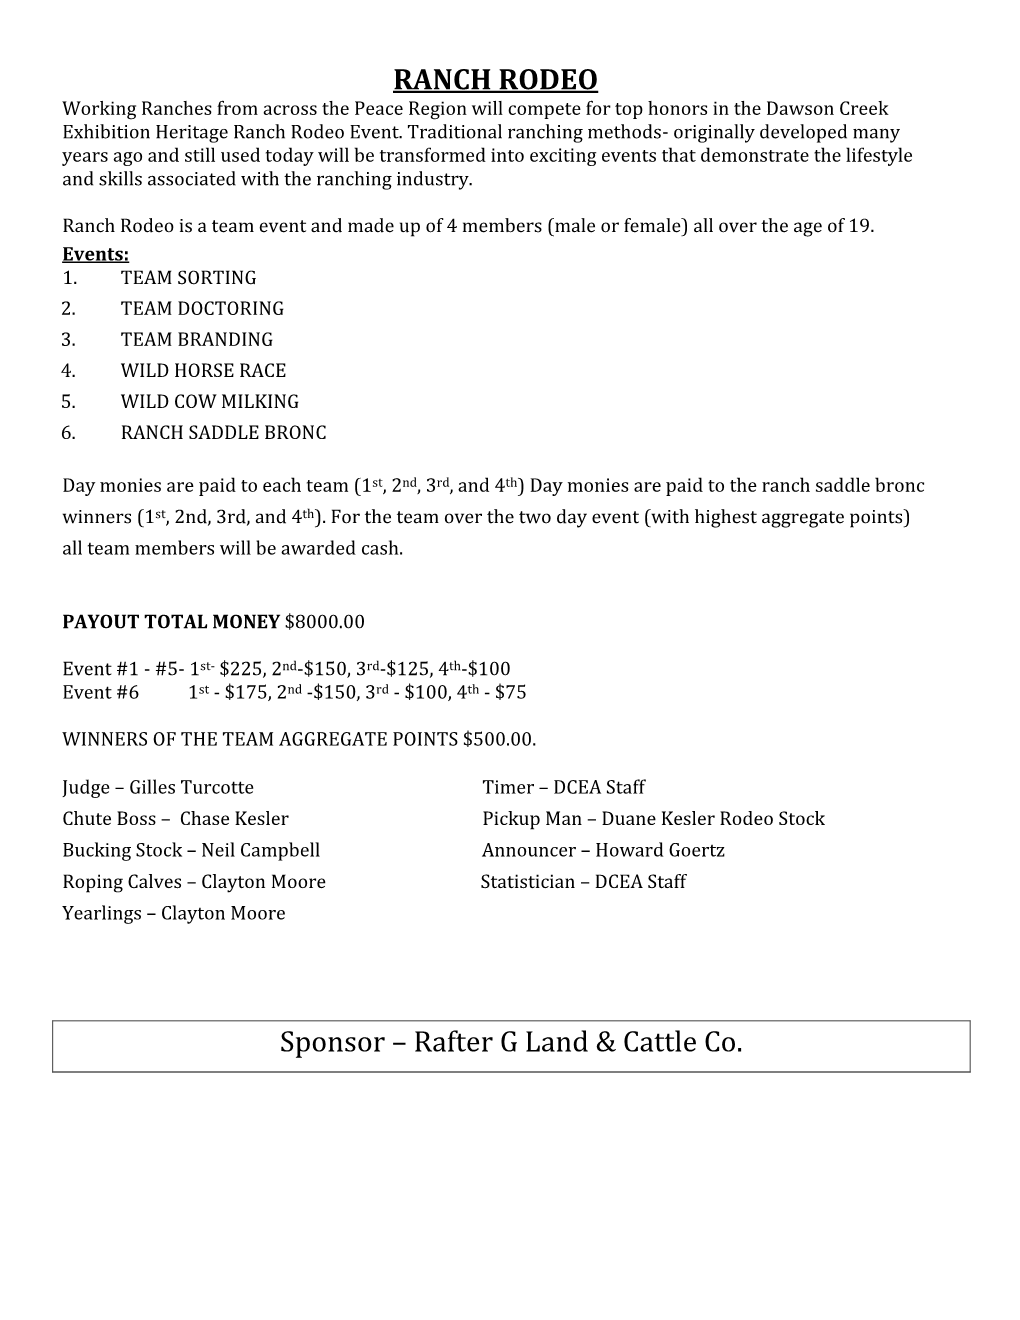 RANCH RODEO Sponsor – Rafter G Land & Cattle